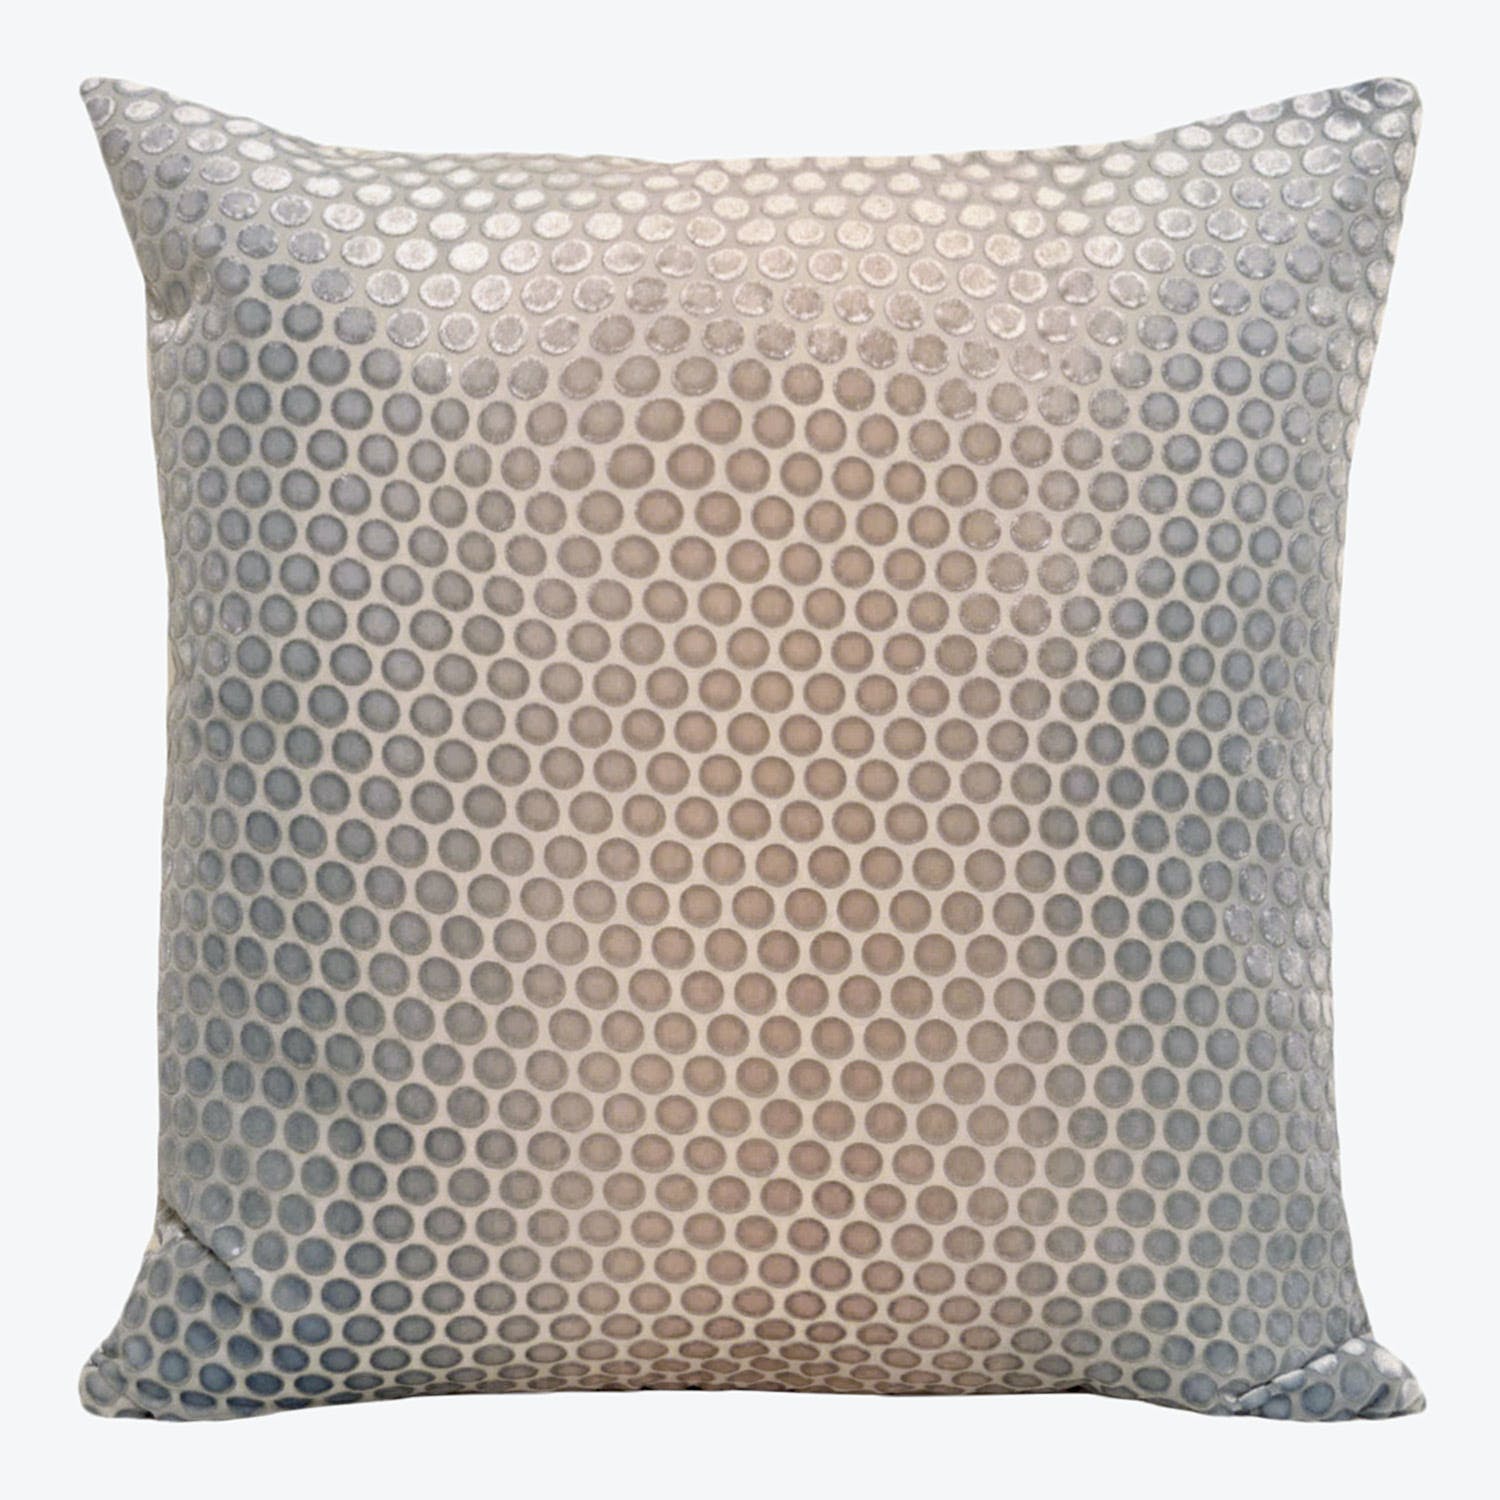 Square decorative pillow with overlapping circle pattern in gradient colors.